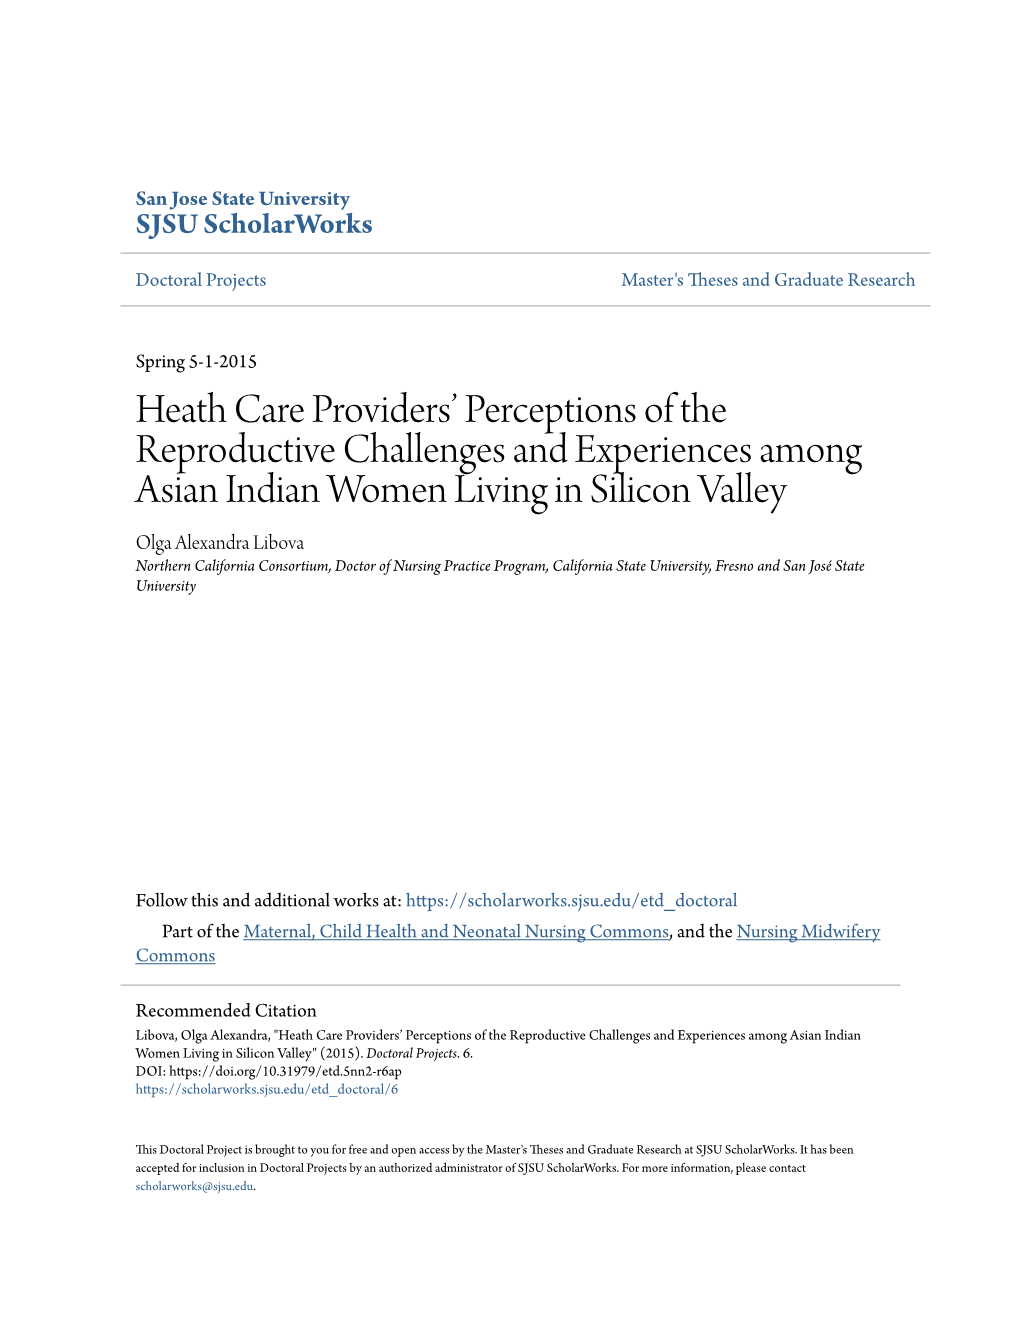 Heath Care Providers' Perceptions of the Reproductive Challenges And